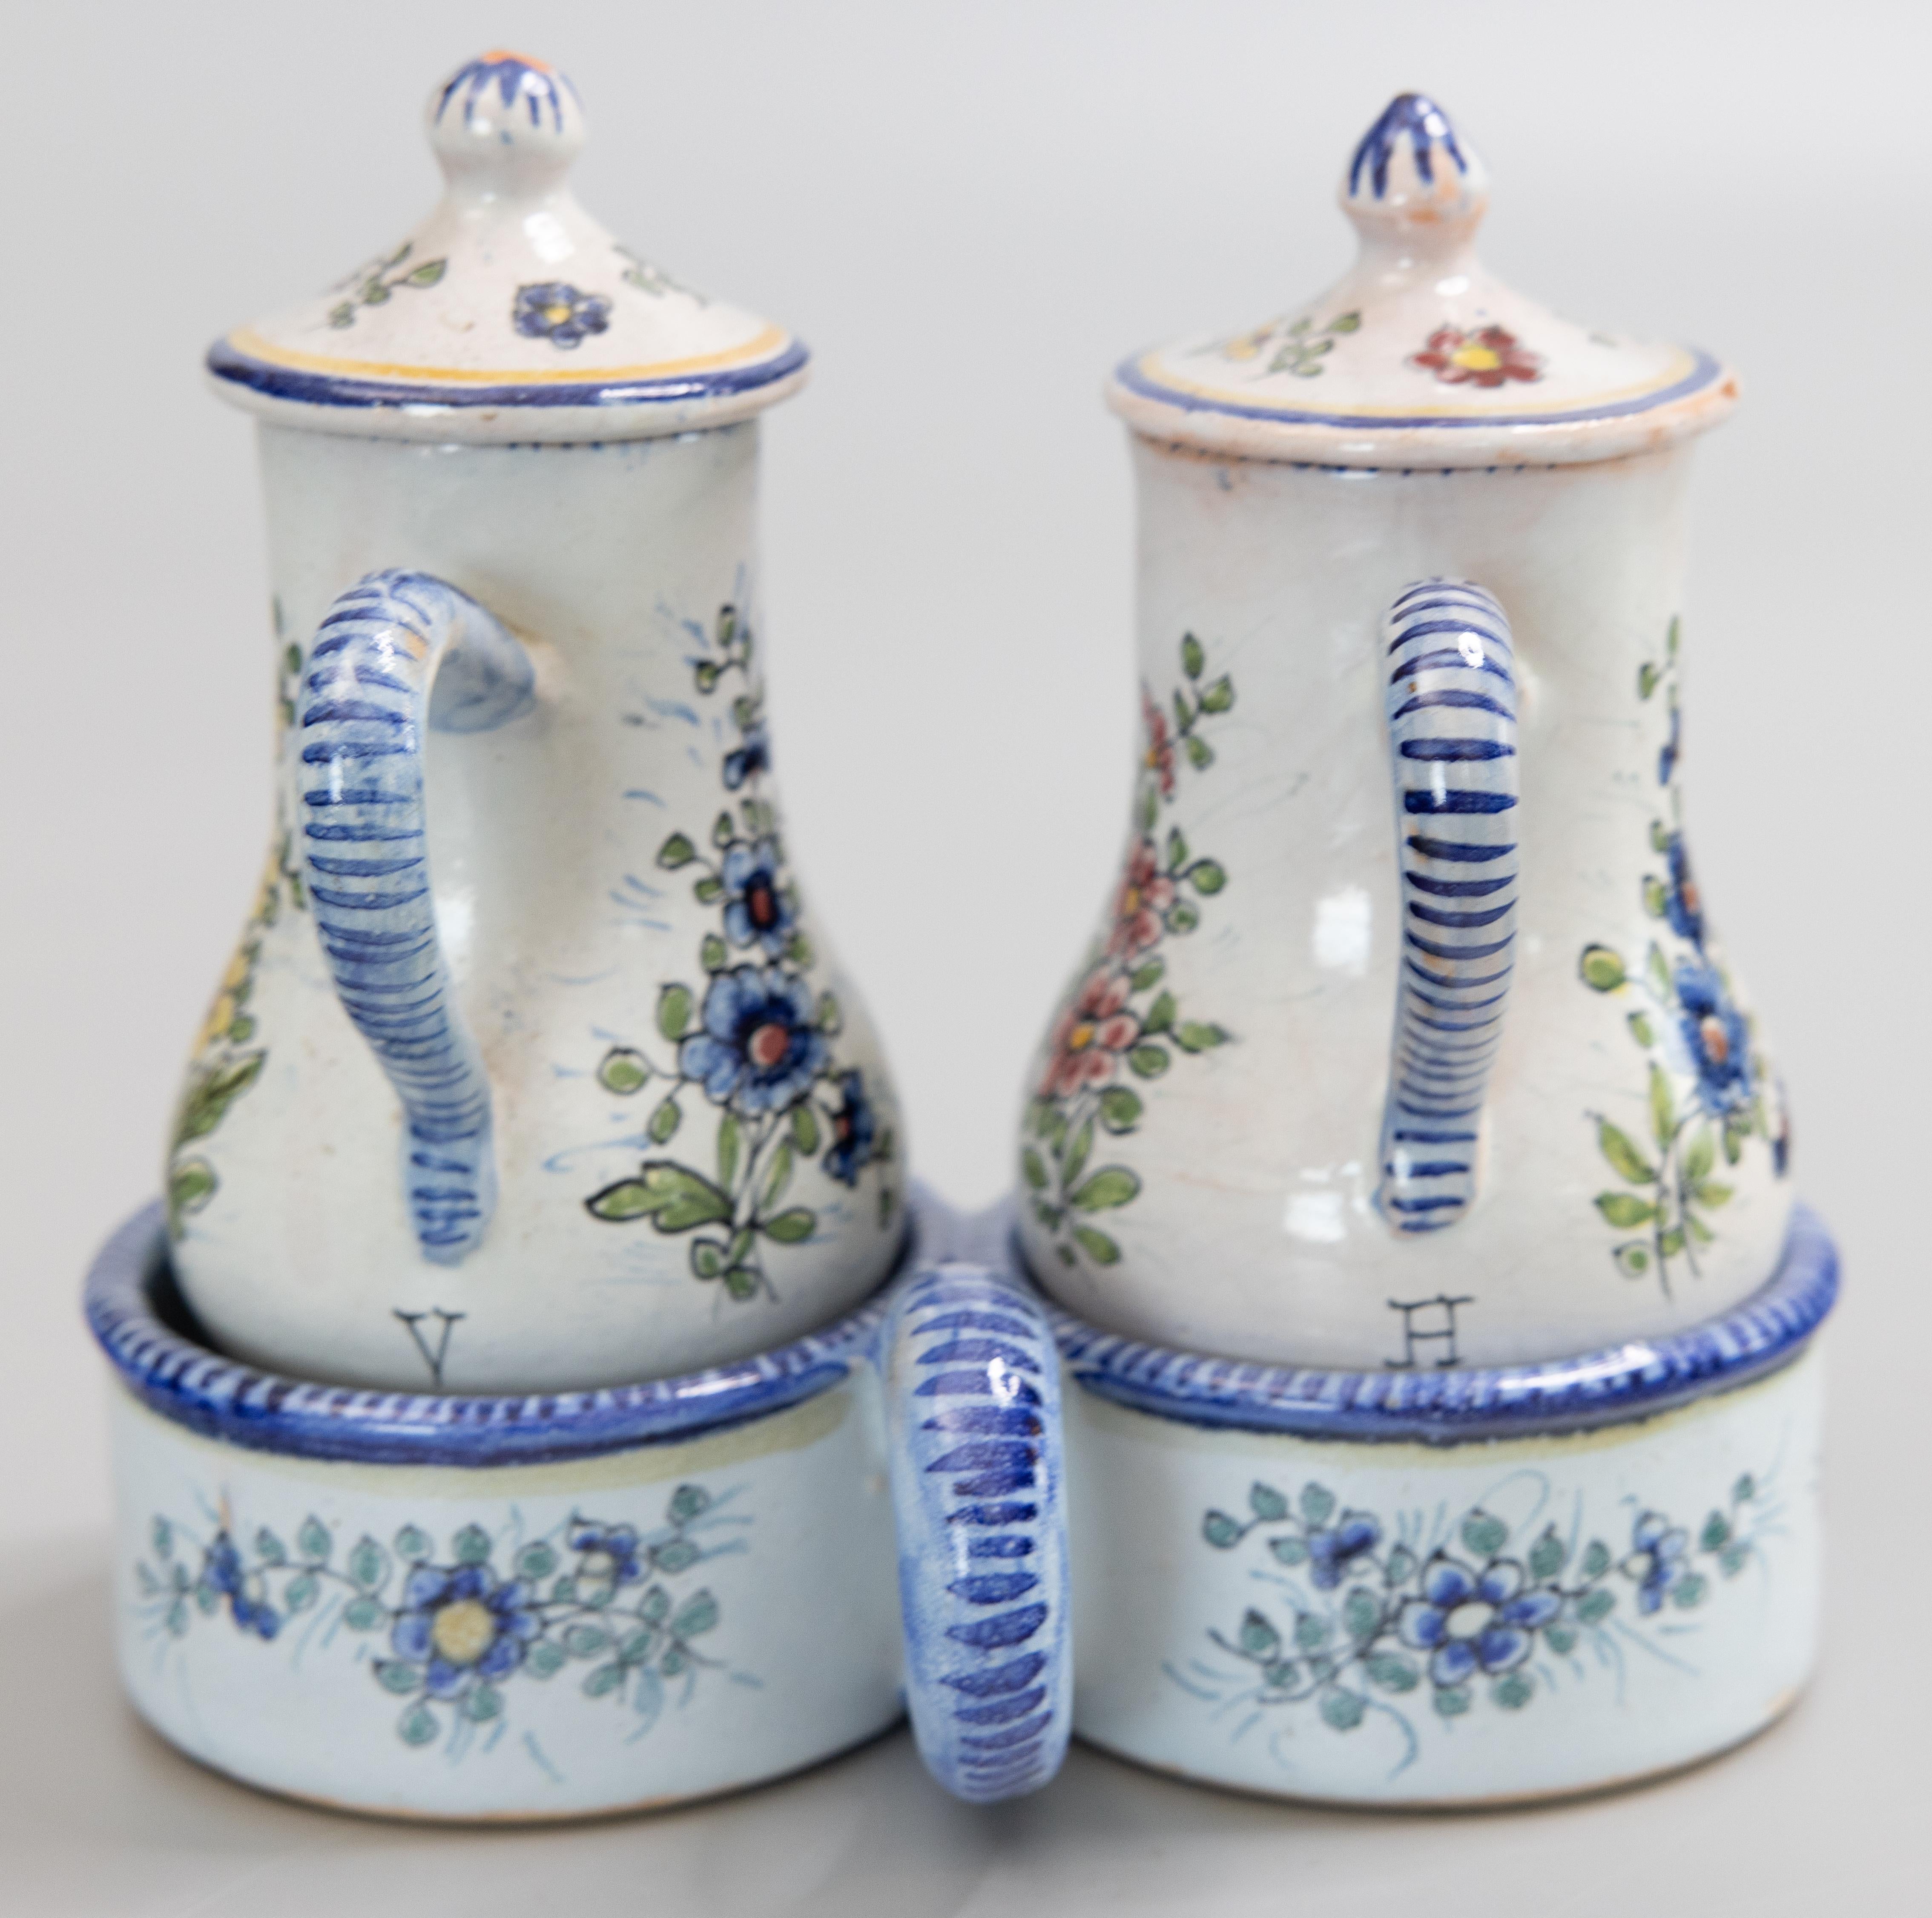 Hand-Painted 19th Century French Faience Quimper Oil & Vinegar Pitchers Cruet Set & Stand For Sale